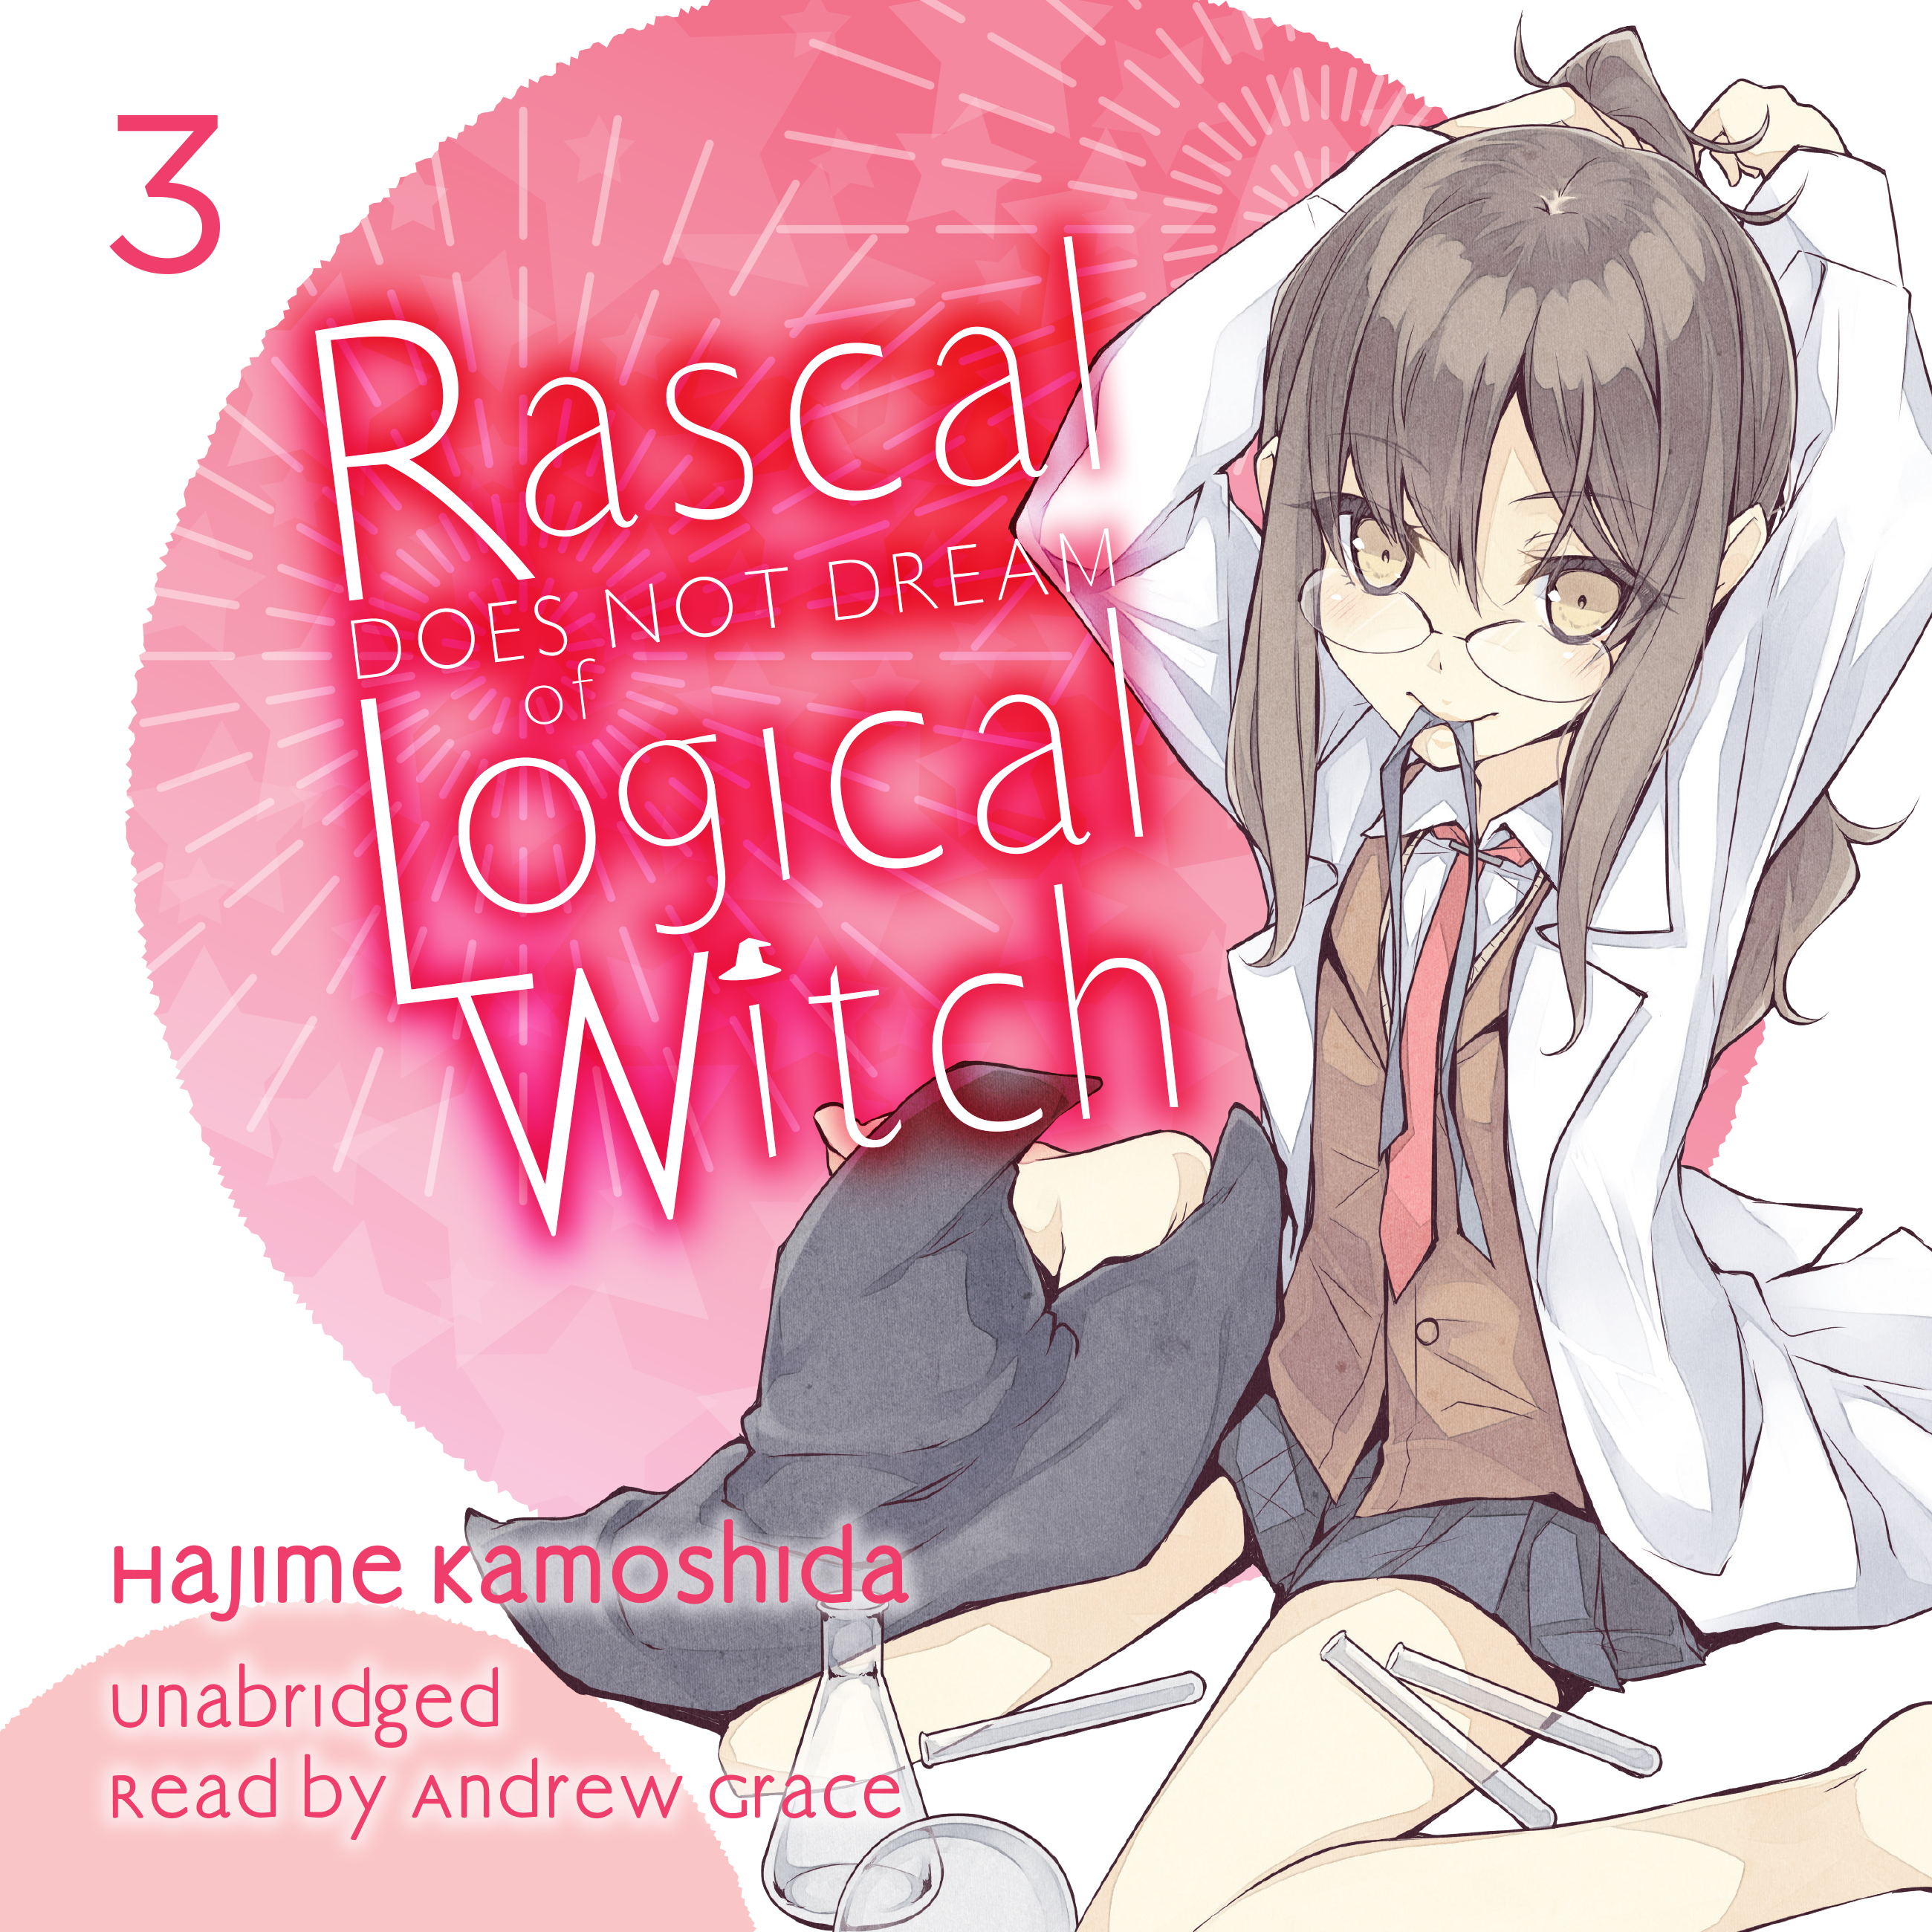 Rascal Does Not Dream of Logical Witch Audiobook — Available Now!